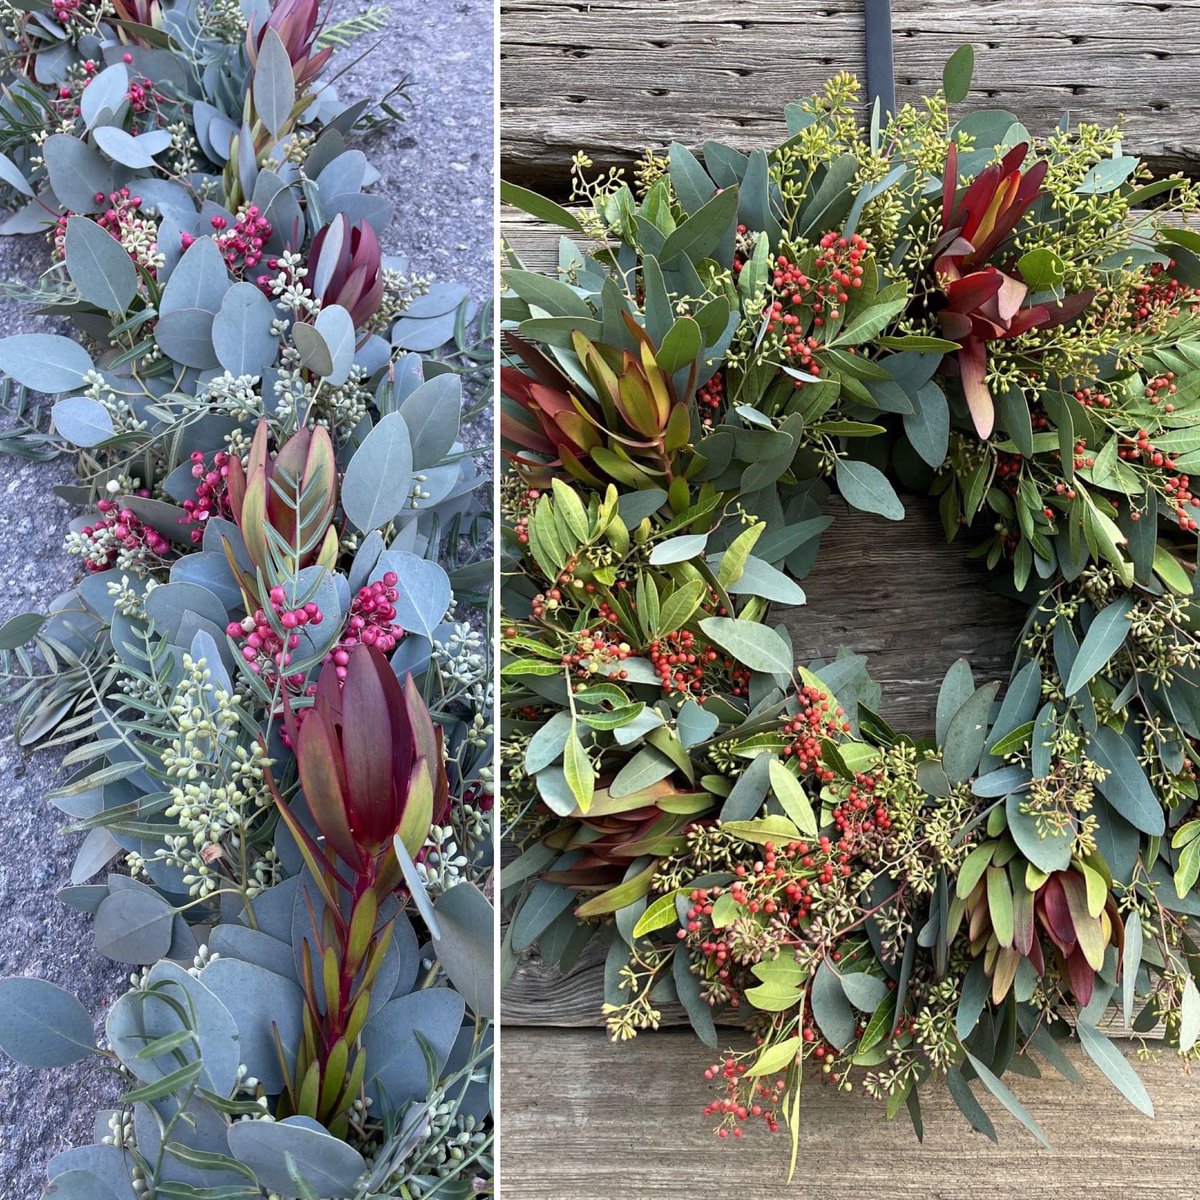 CamFlor custom wreaths and garlands.  All made to order please give us advance notice prior to shipping.  🤩✨💚❤️🎄

•
•
•
•
•
#888camflor #CAgrown #growershipper #americangrownfoliage #greenery #wreathmaker #customwreaths #garlands #holidaydecor #holidayseasoniscoming